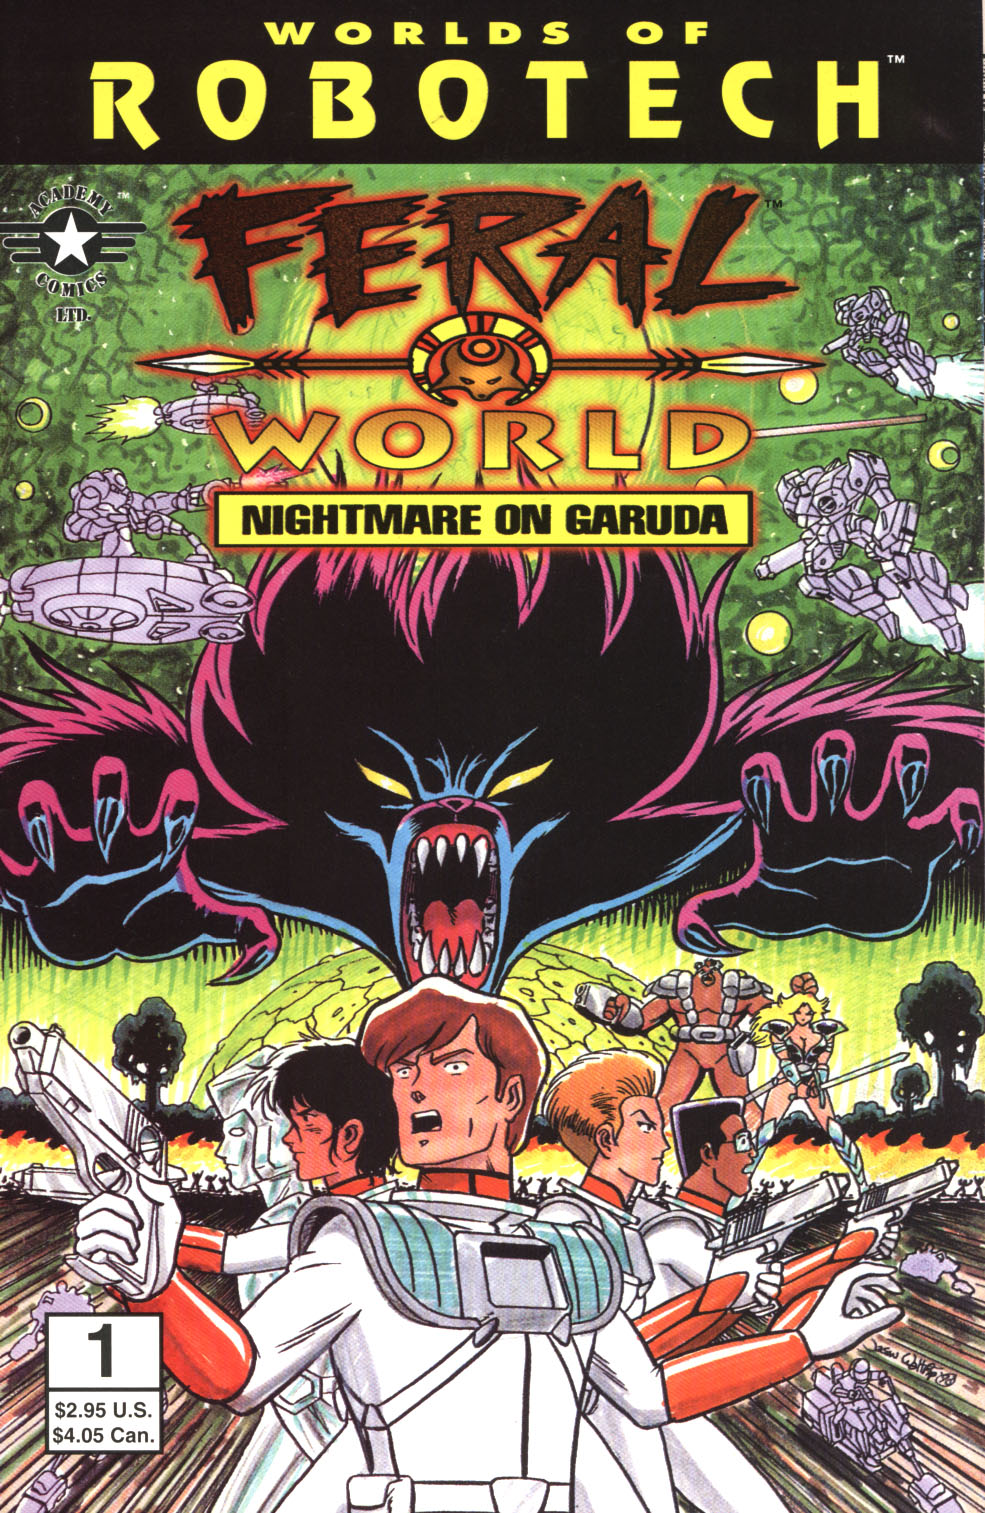 Read online Worlds of Robotech: Feral World: Nightmare on Garuda comic -  Issue # Full - 1